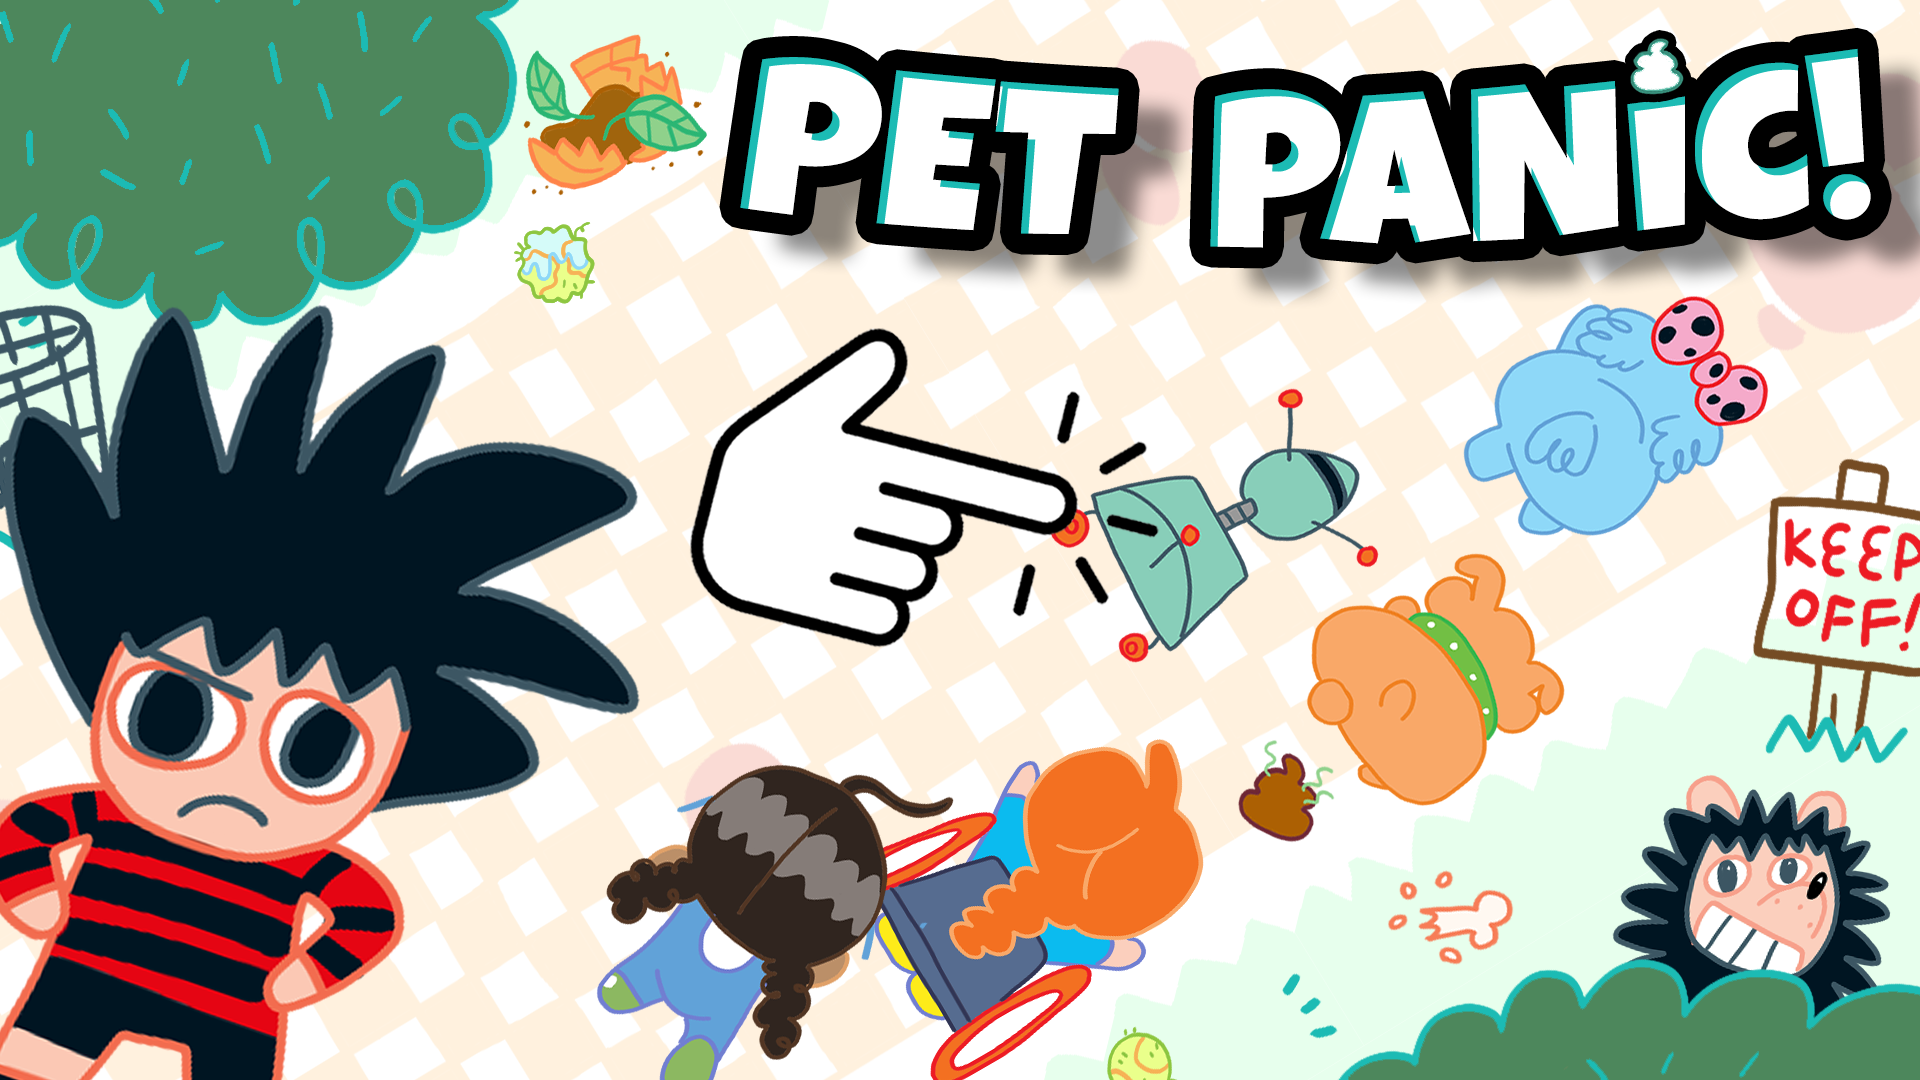 Tap here to play the Pet Panic dog walking game